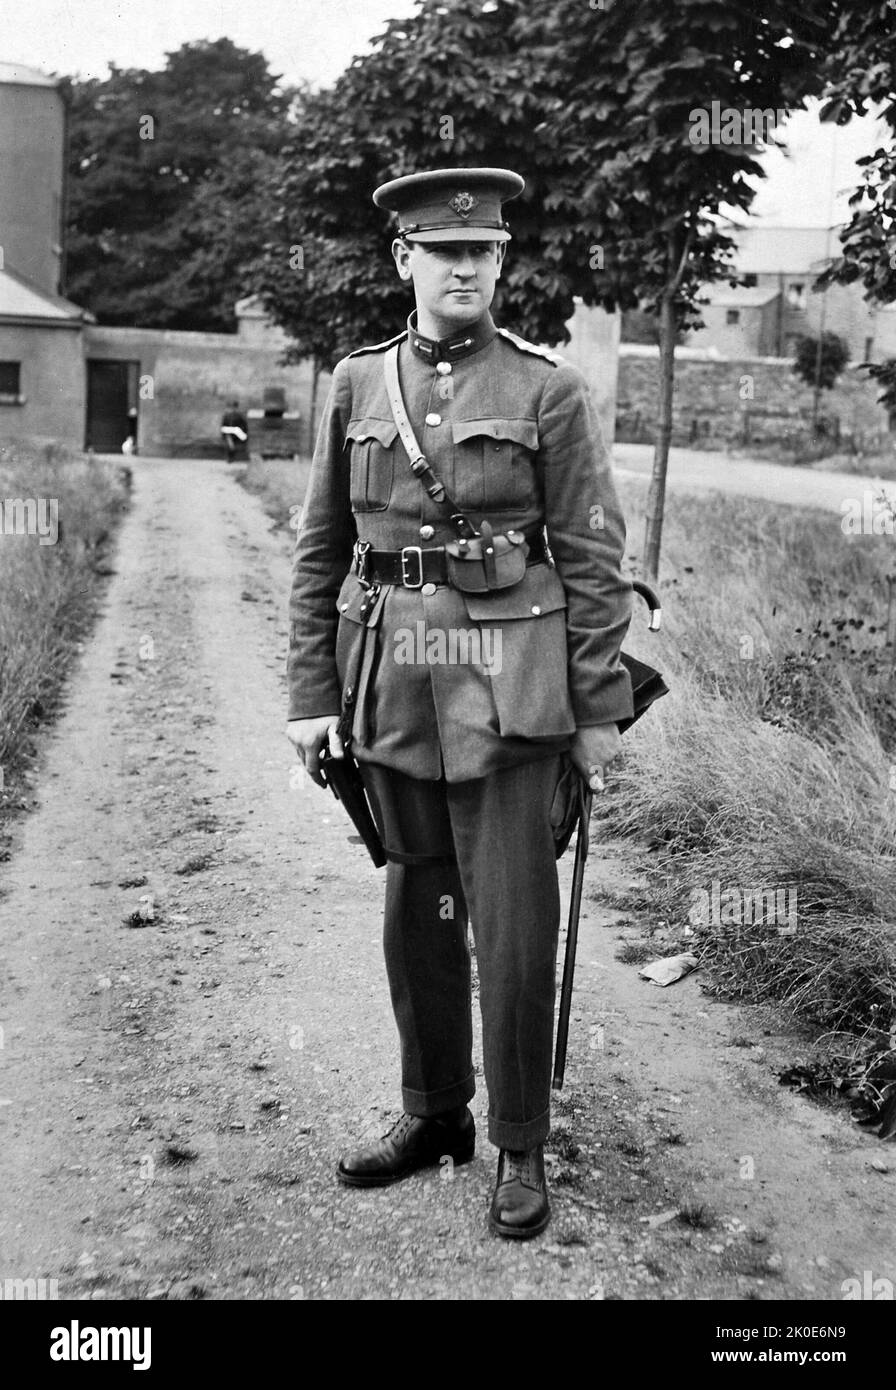 Michael Collins (1890 - 1922) Irish revolutionary, soldier and politician who was a leading figure in the early-20th century struggle for Irish independence. He was Chairman of the Provisional Government of the Irish Free State from January 1922, and commander-in-chief of the National Army from July until his death in an ambush in August 1922, during the Civil War. Stock Photo